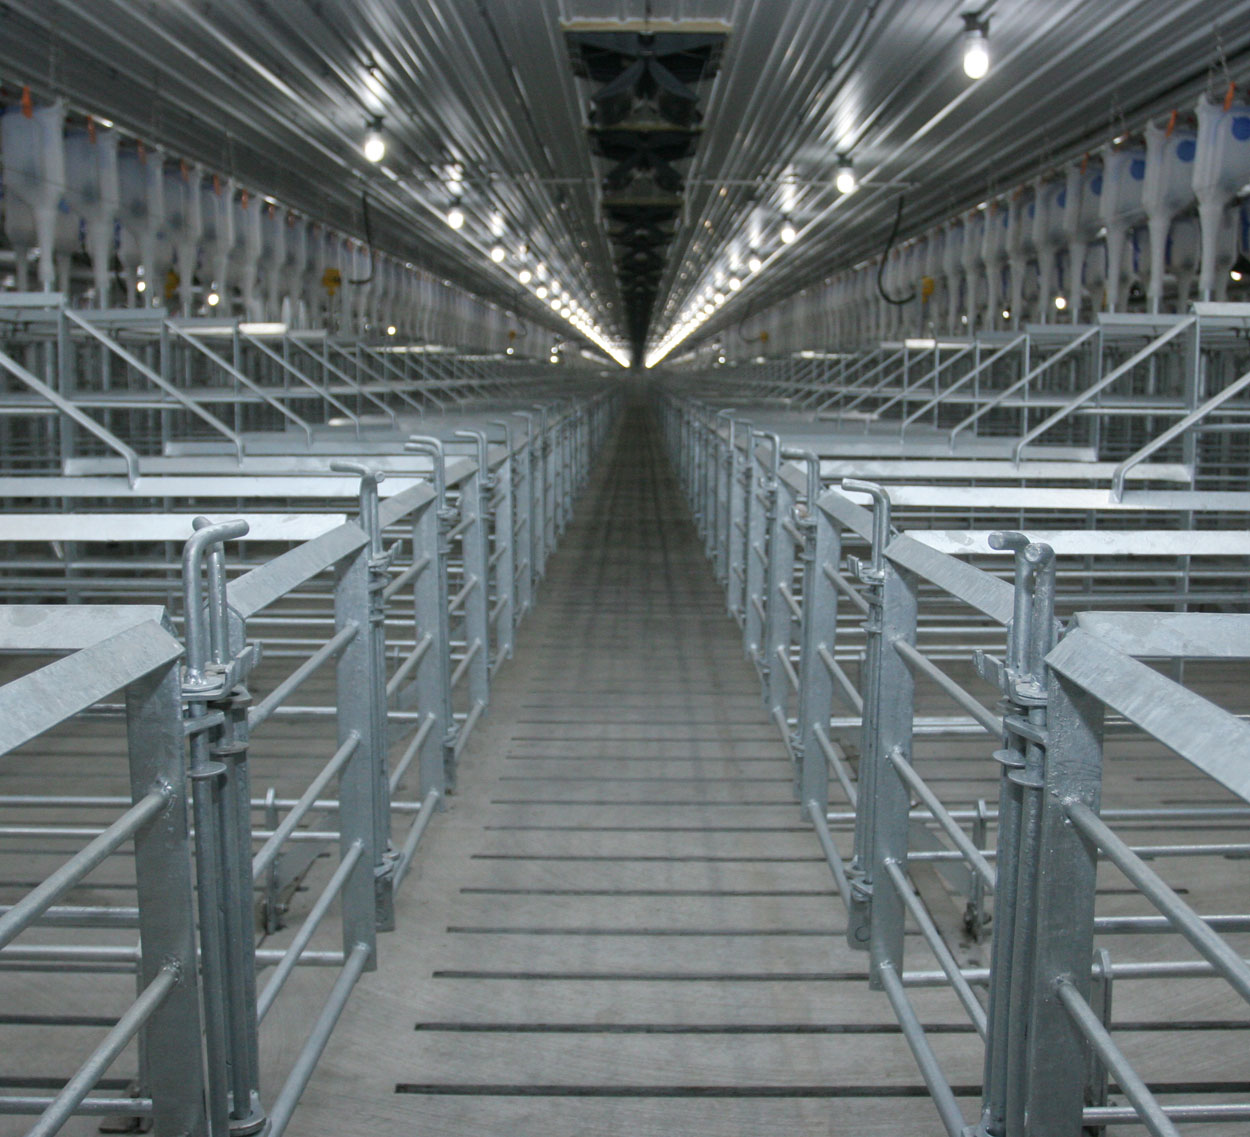 Hog Slat’s “No-Weld” bolt-together installation design allows our gestation stalls to be assembled in the barn quicker than competitive models. Our pre-punched top bars and floor spacers ensure proper alignment and spacing every time.